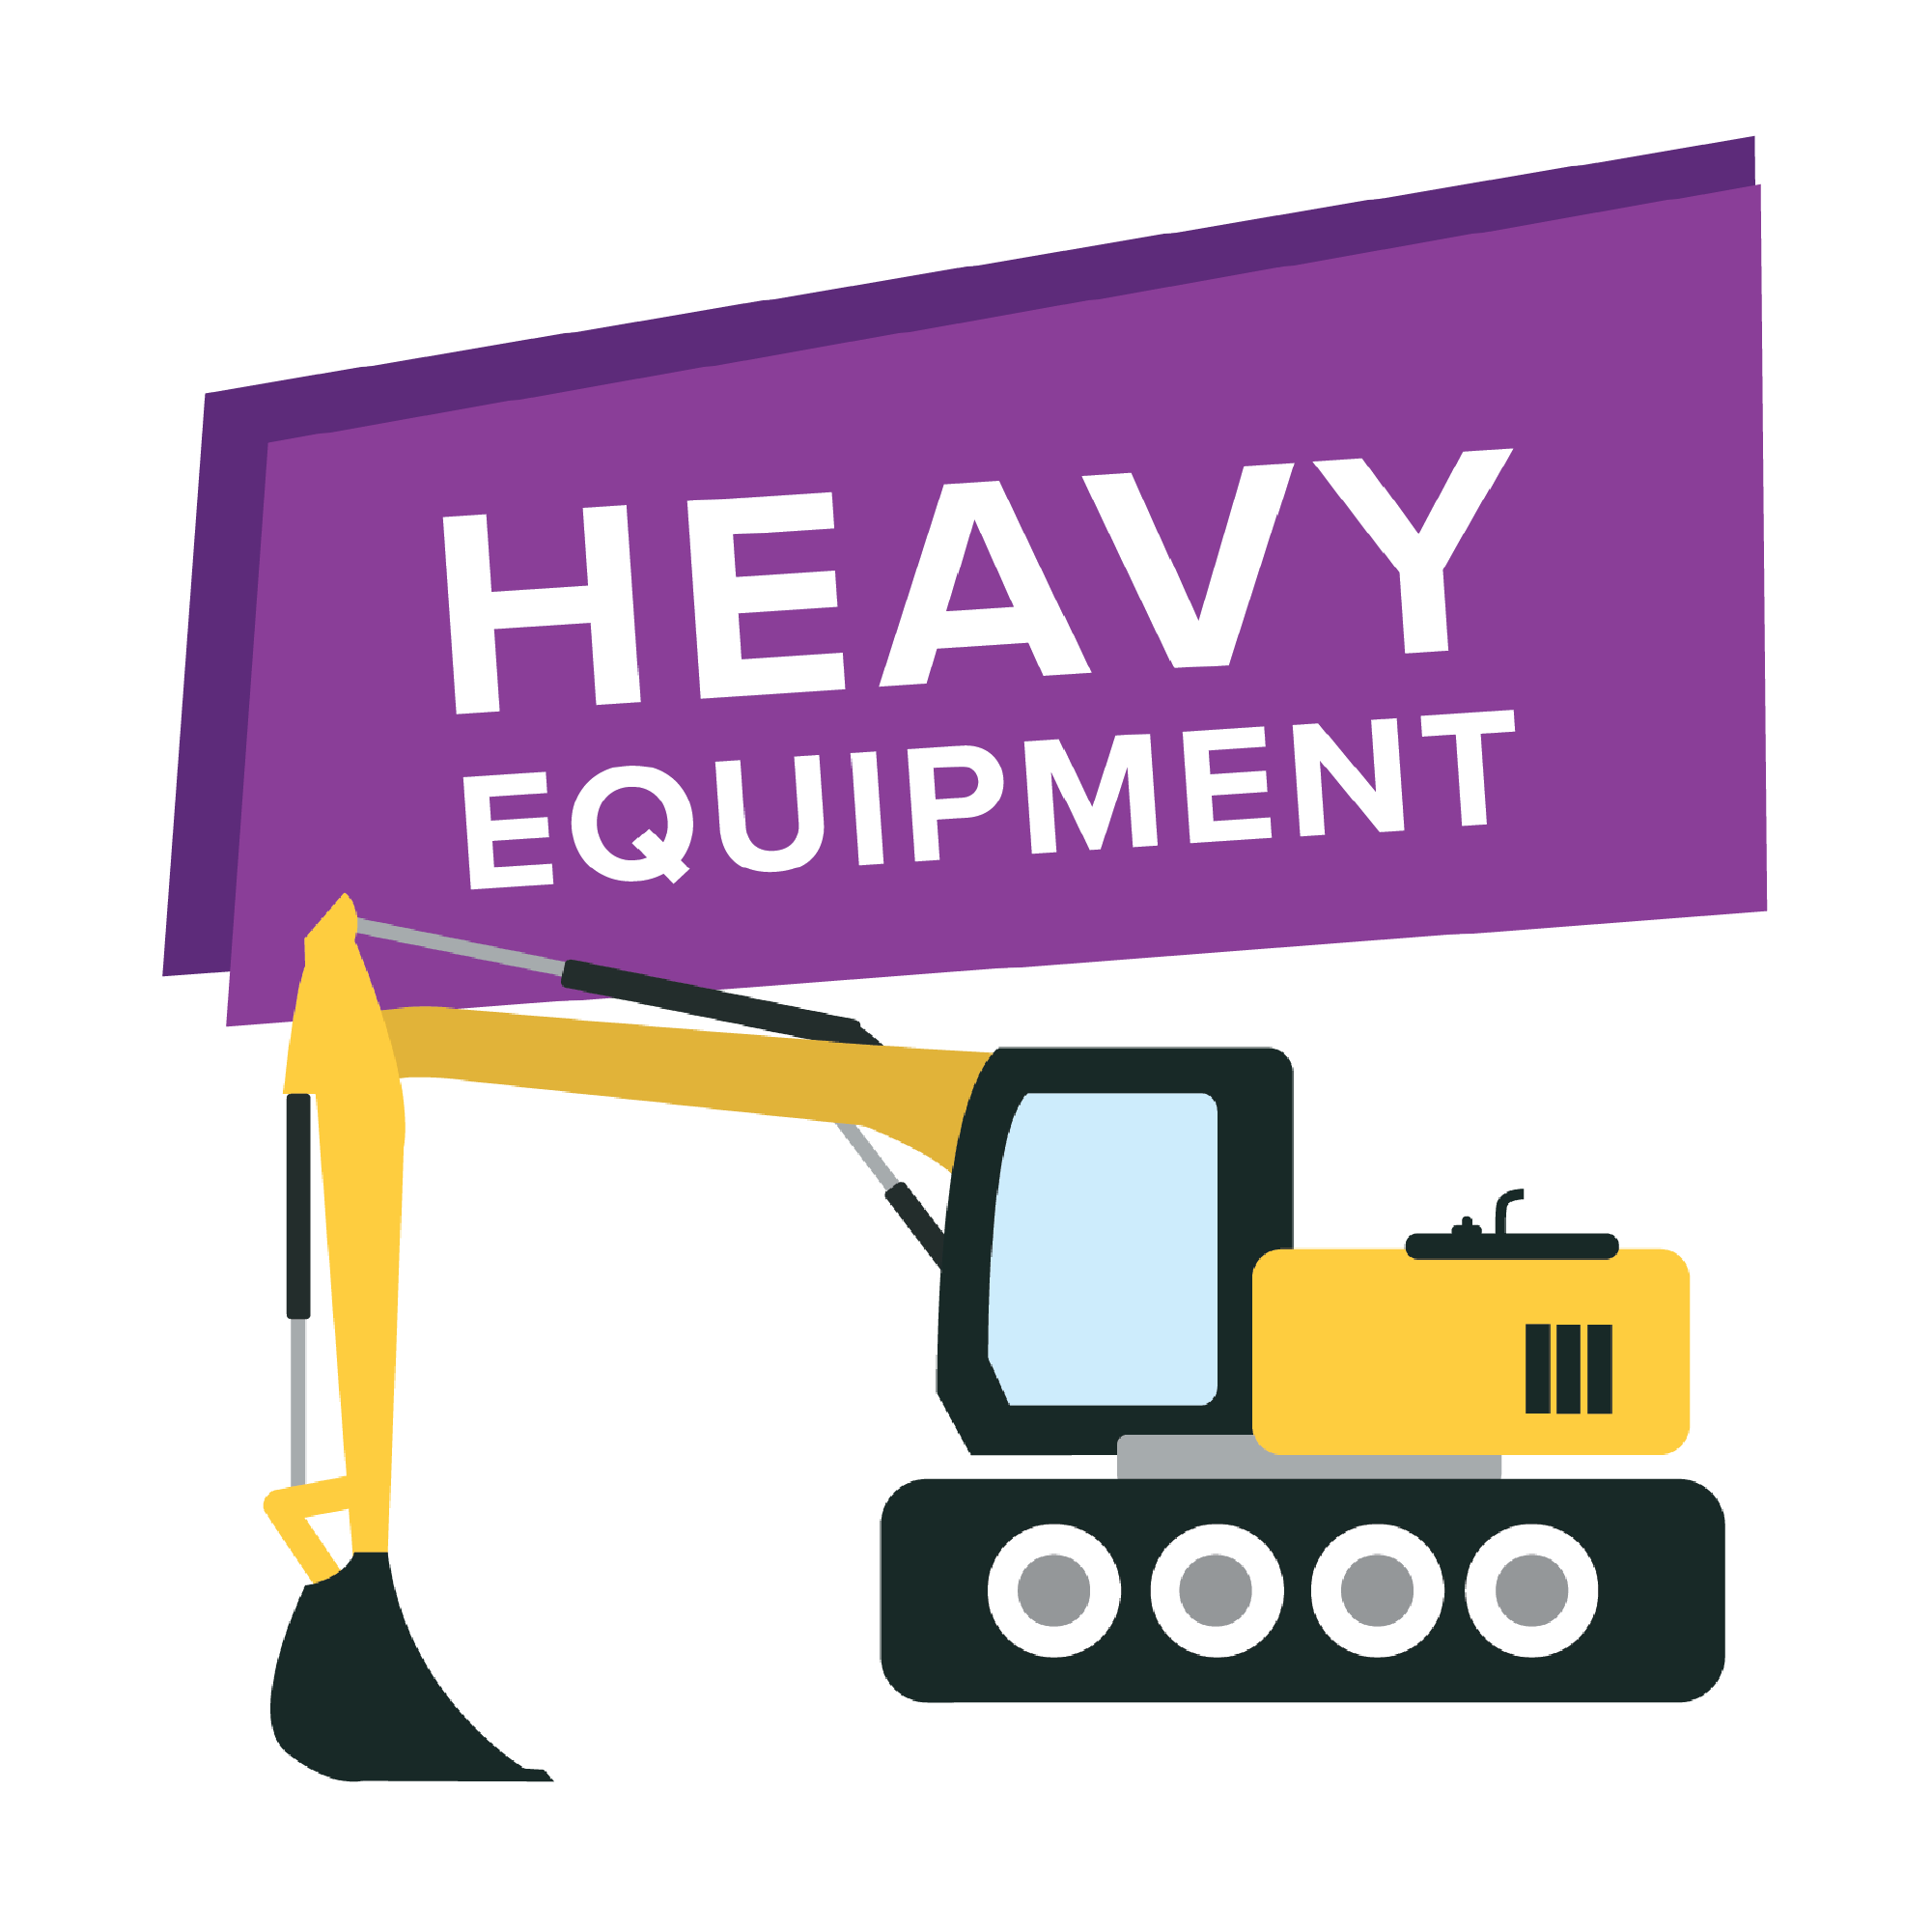 Heavy Equipment, Heavy Vehicles, Forklifts, Man Lifts,, & More